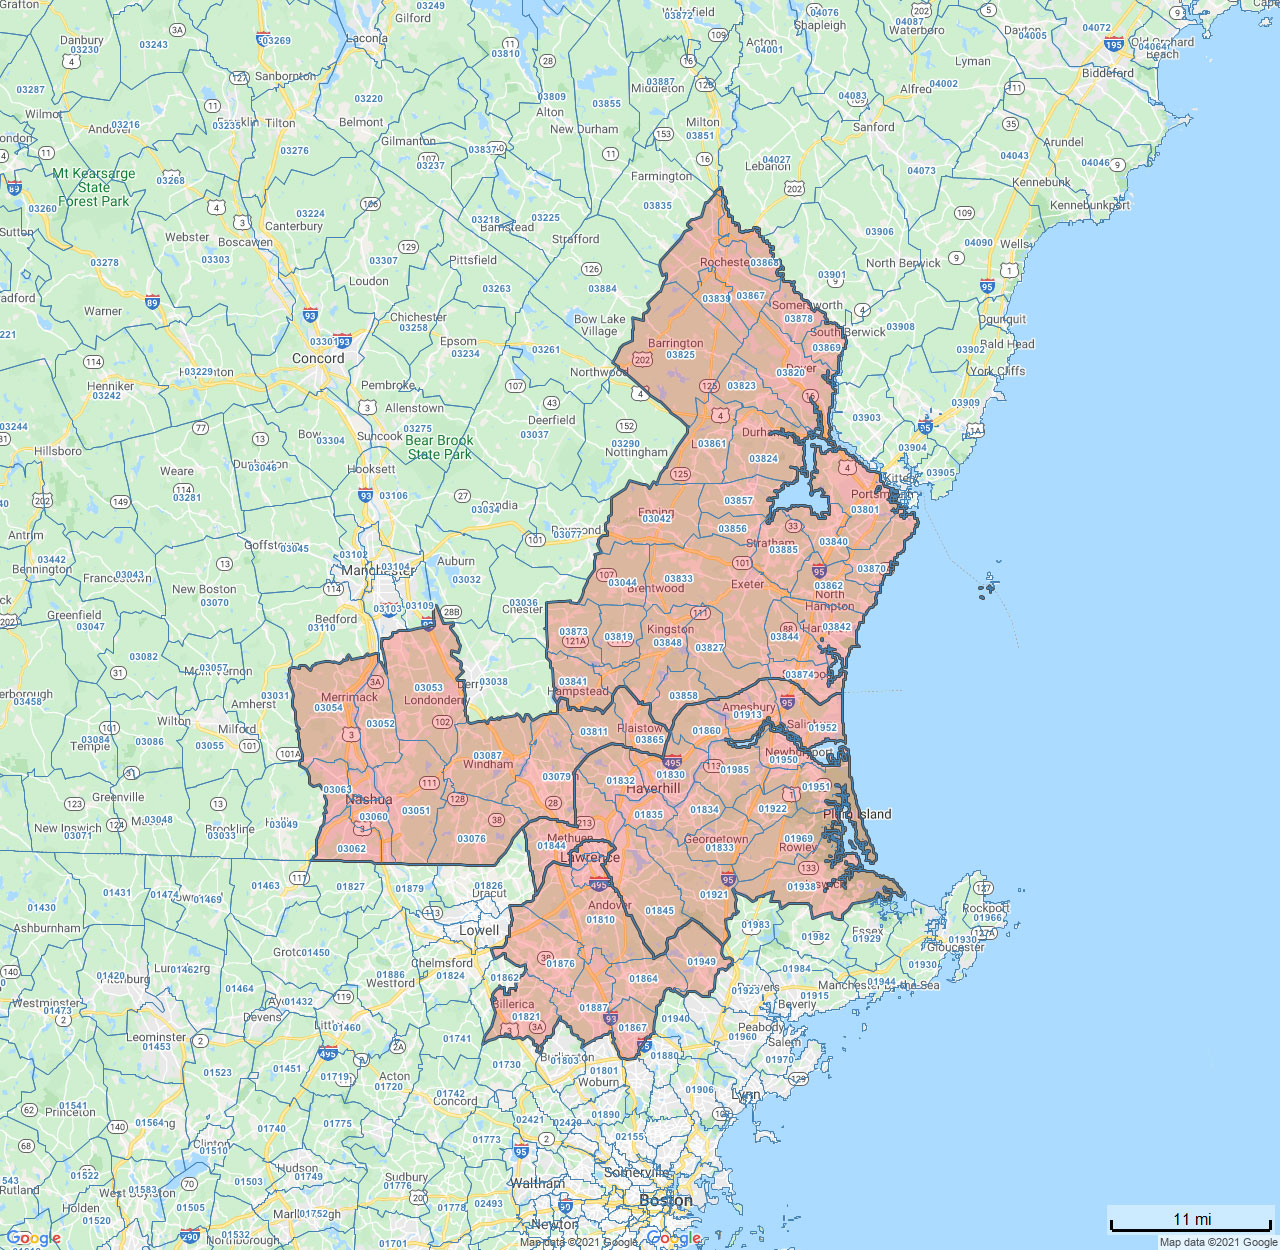 All Dry Services Area Coverage Map for Southern / Seacoast, Merrimack Valley